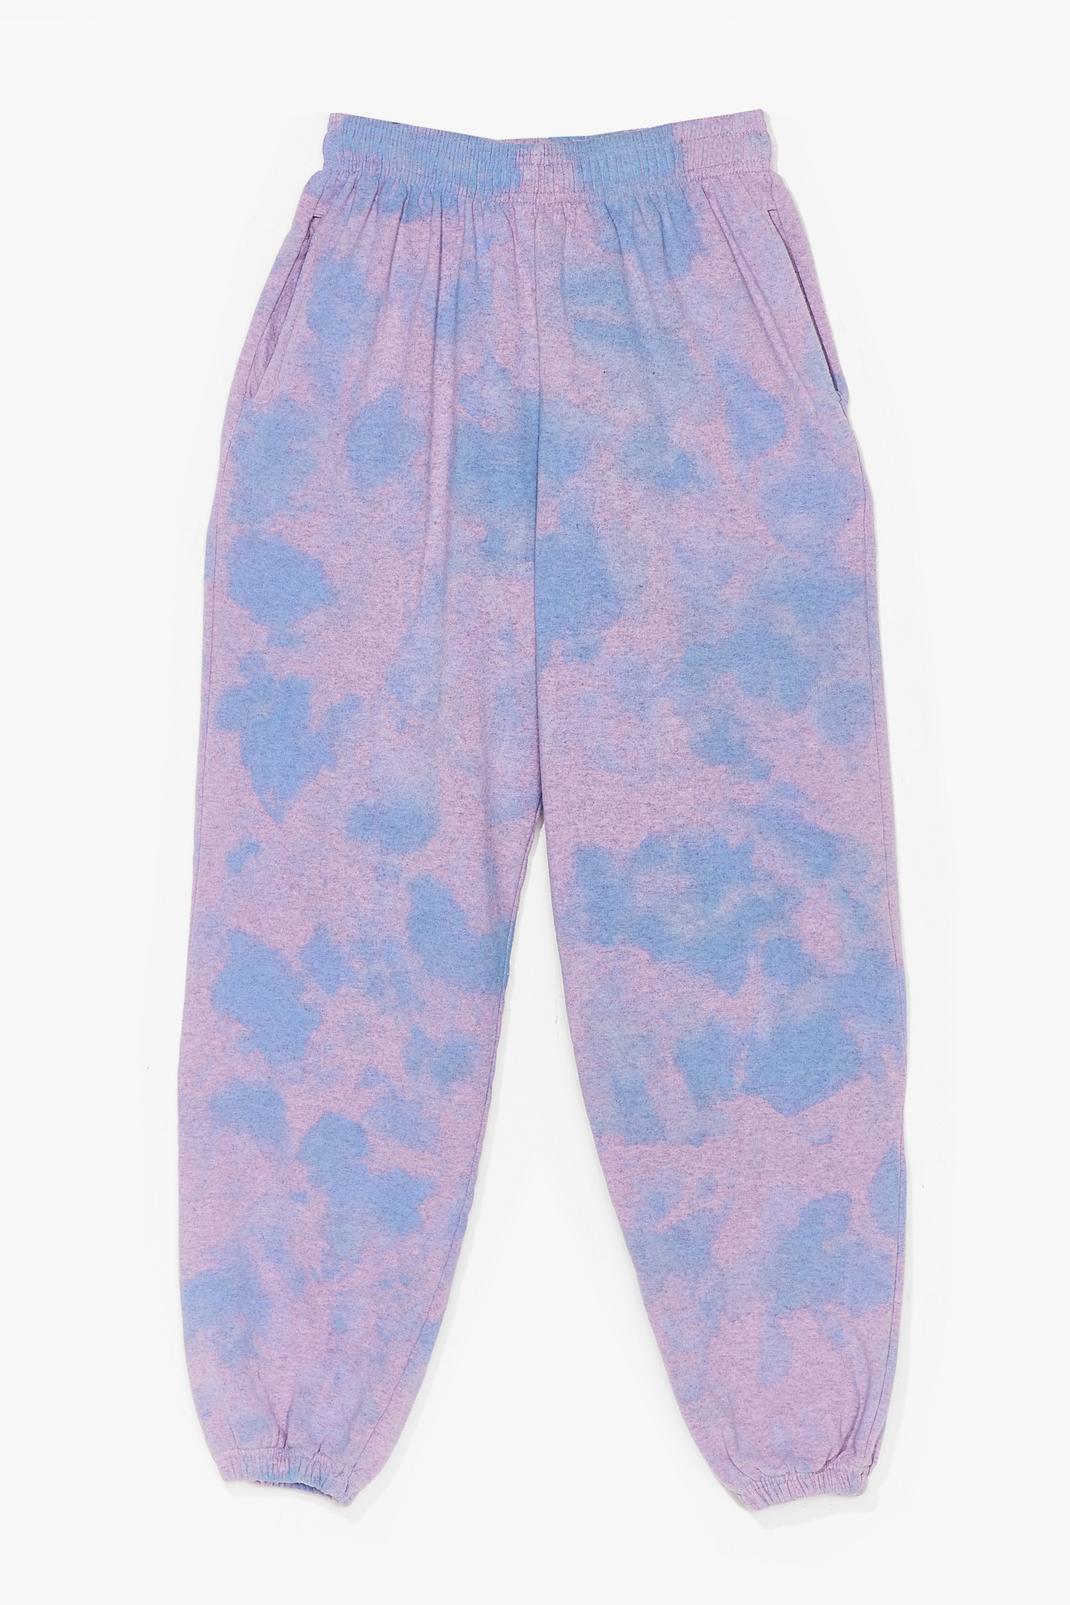 Purple Tie Dye Slouchy High Waisted Sweatpants image number 1